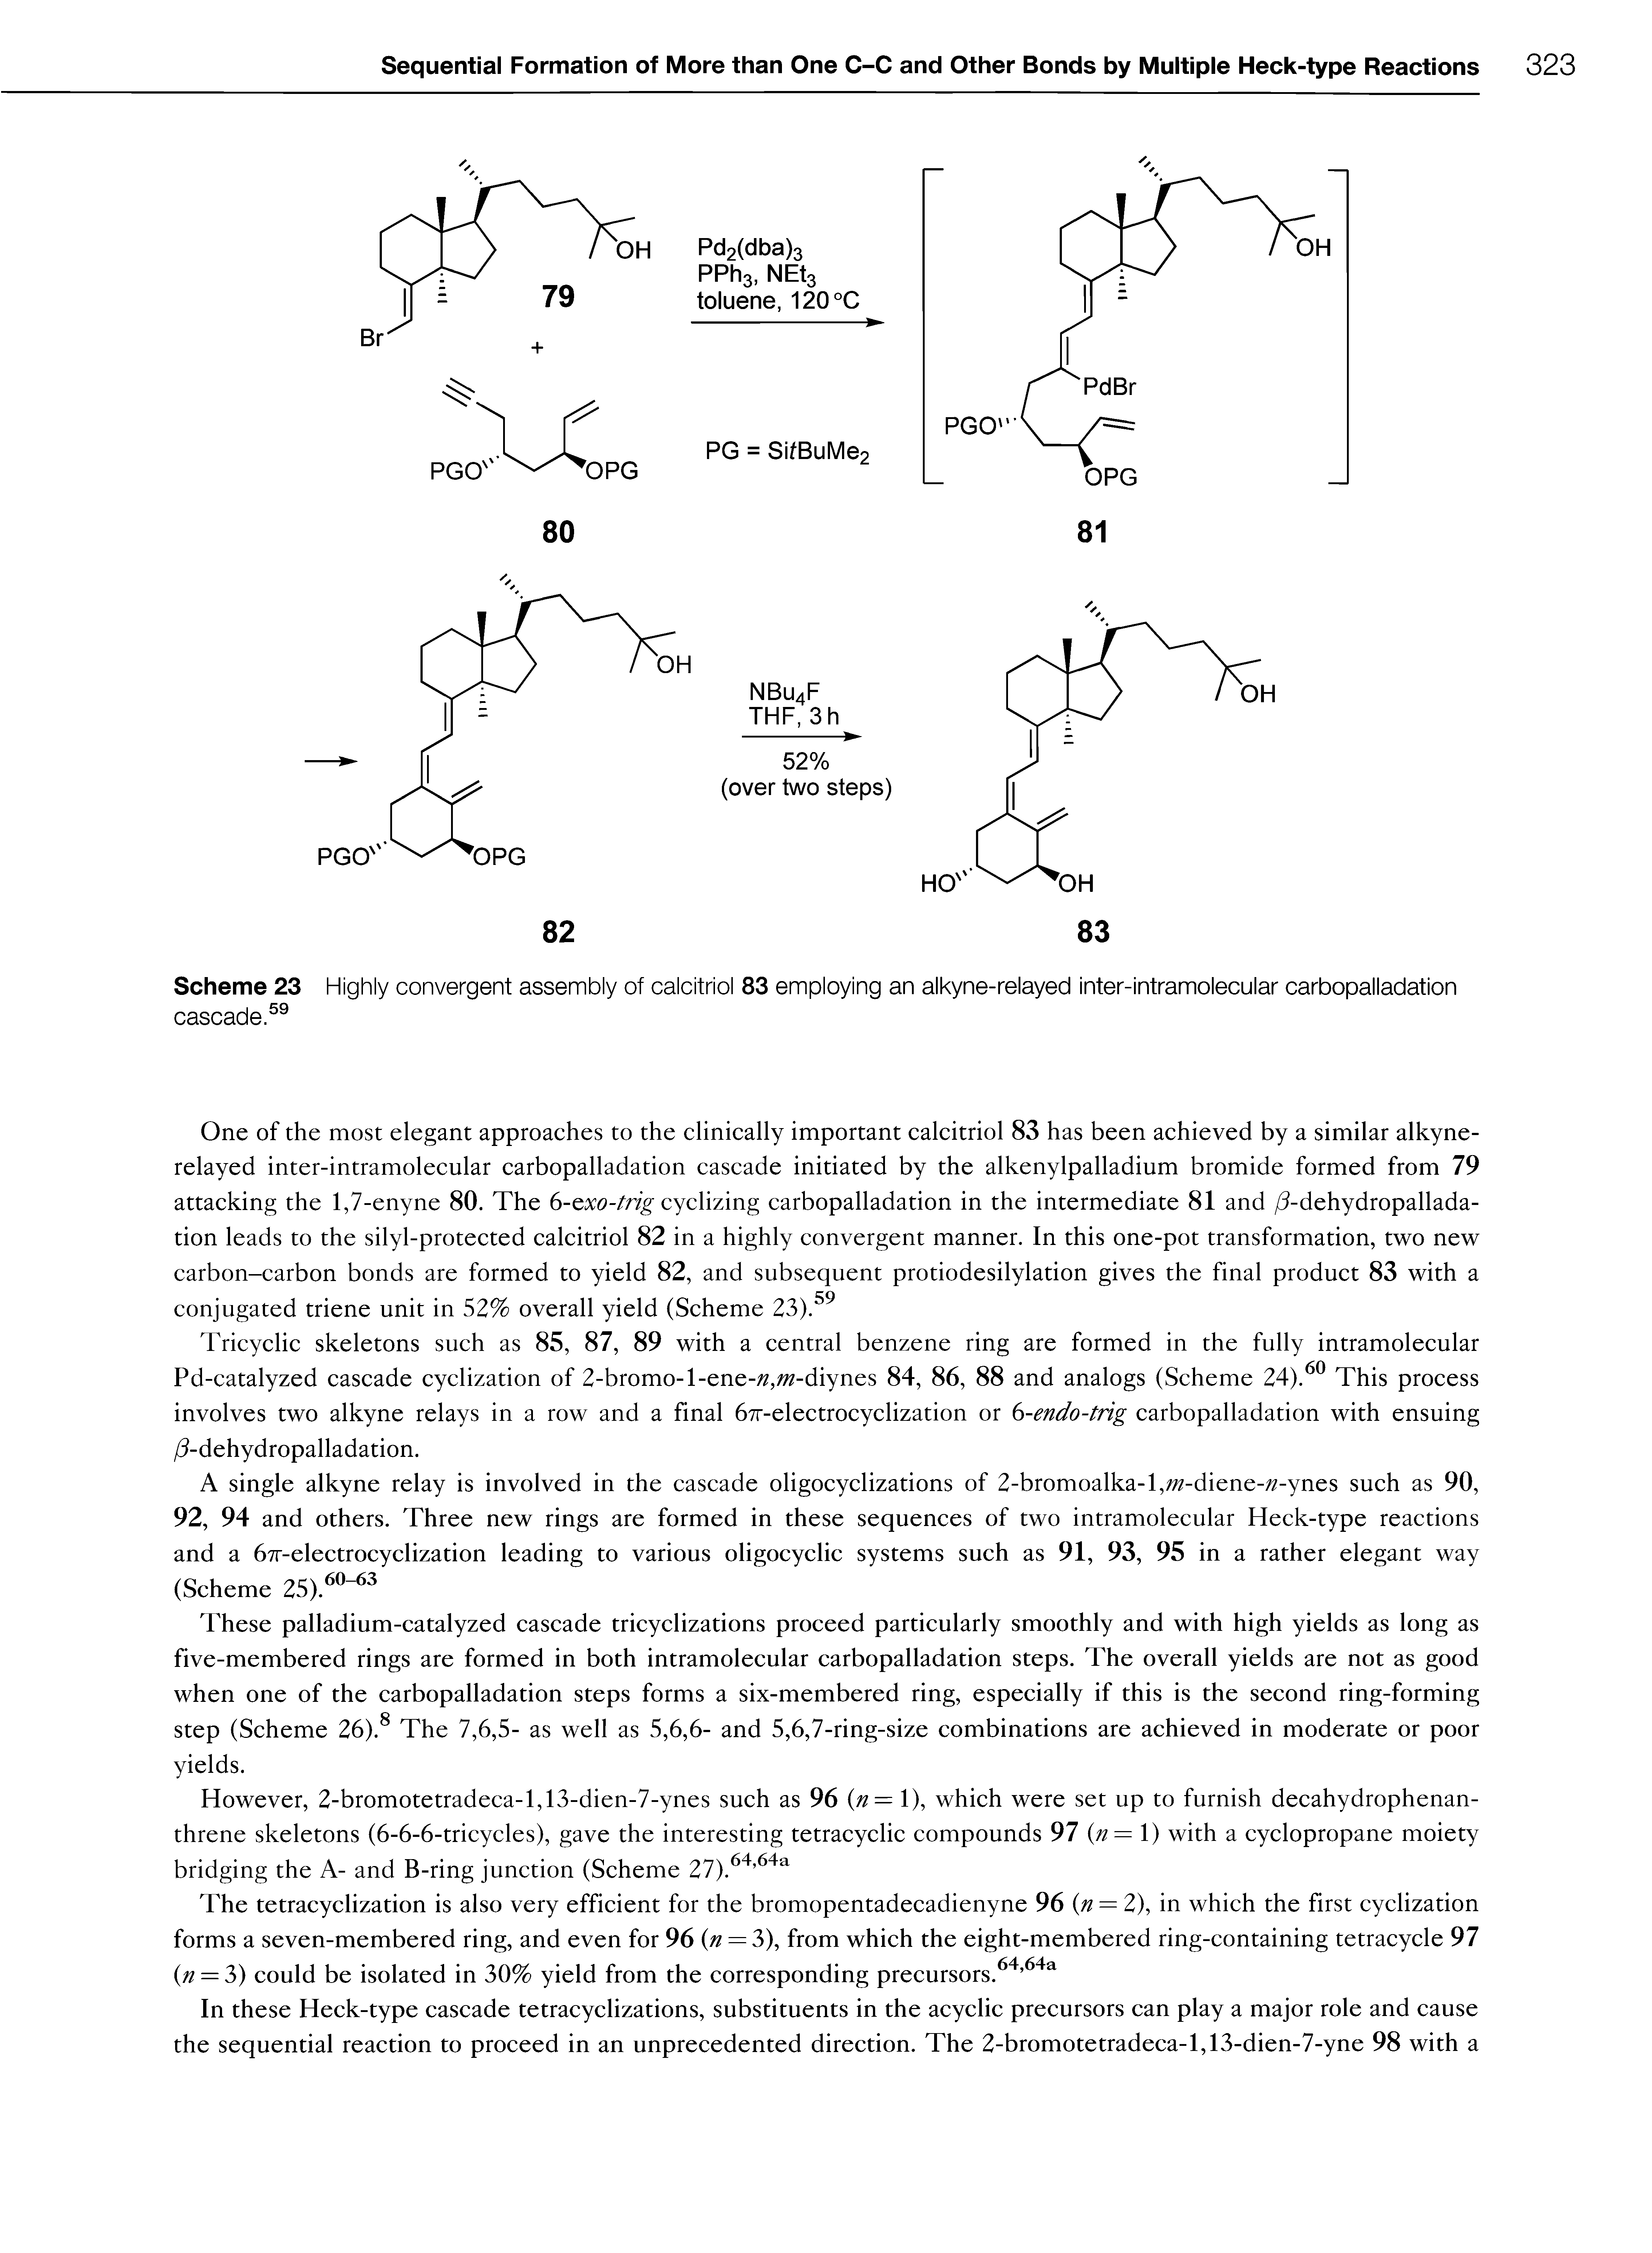 Scheme 23 Highly convergent assembly of calcitriol 83 employing an alkyne-relayed inter-intramolecular carbopalladation cascade.